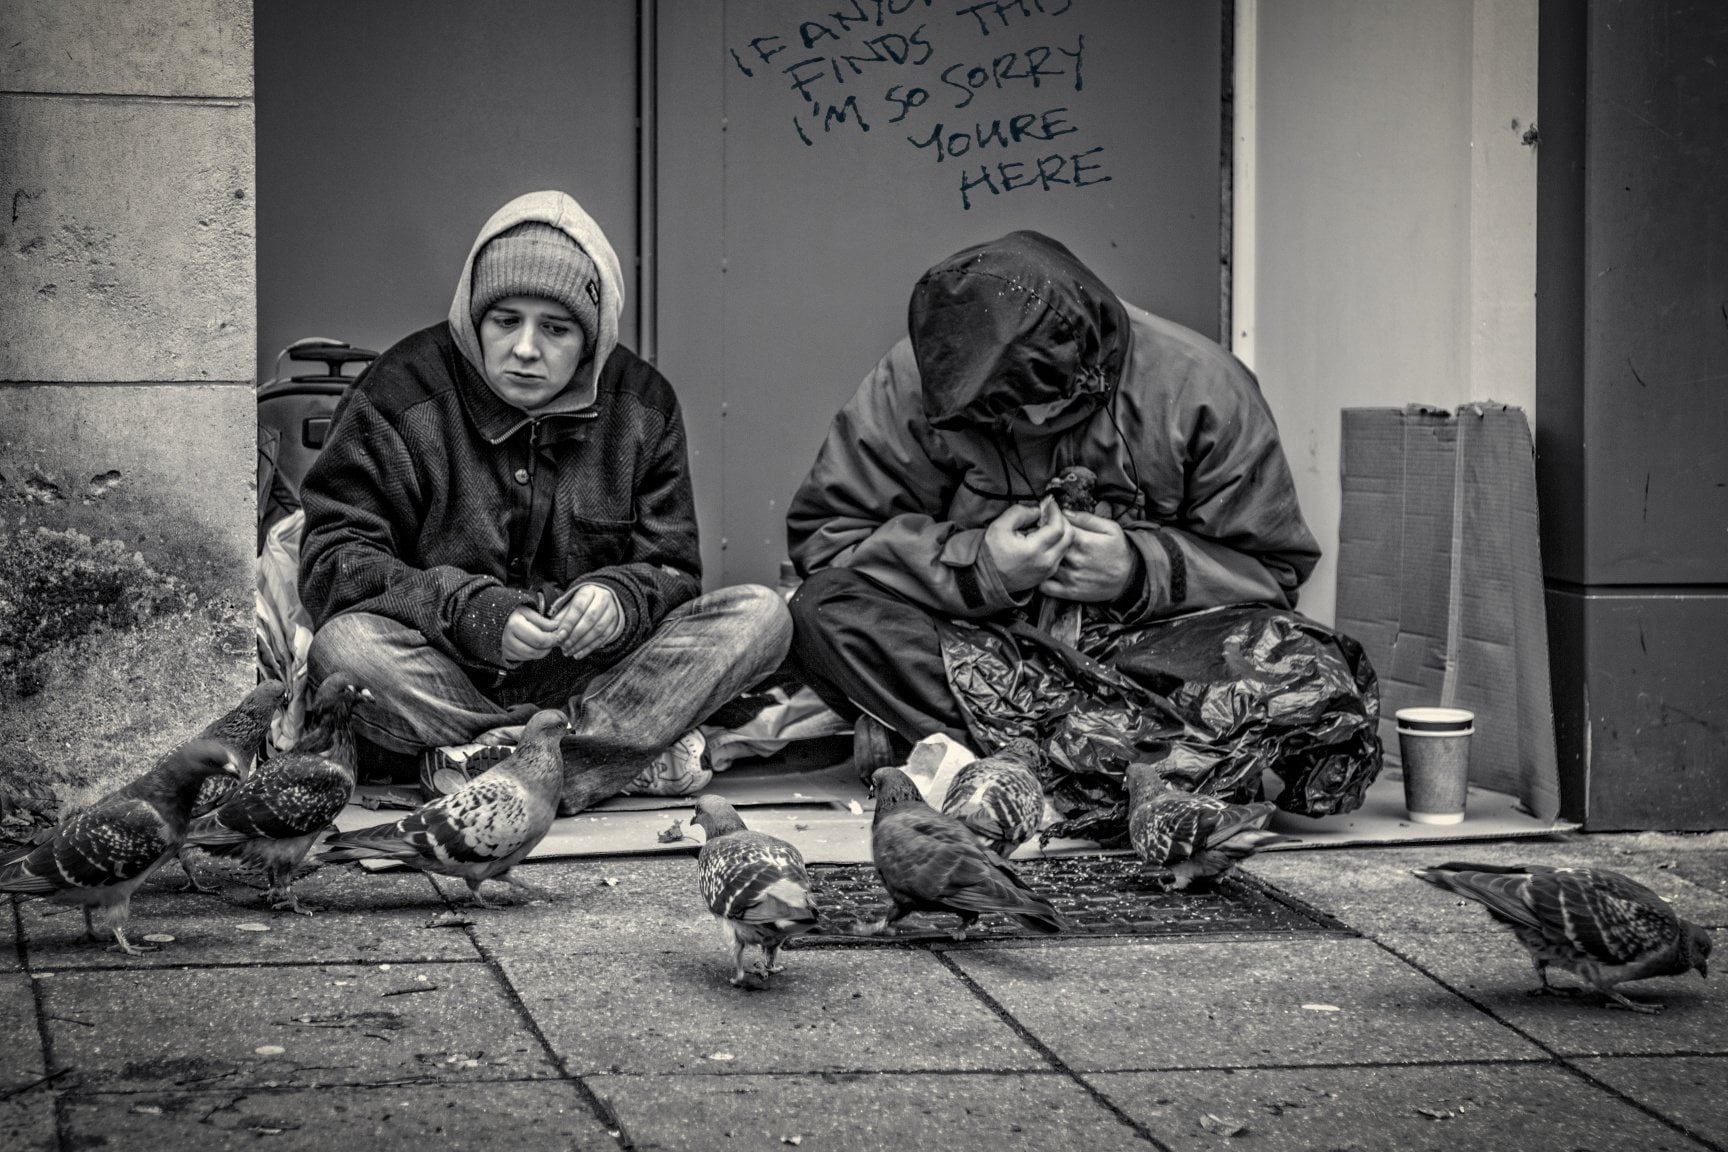 Homeless crisis in Britain: no hope under capitalism